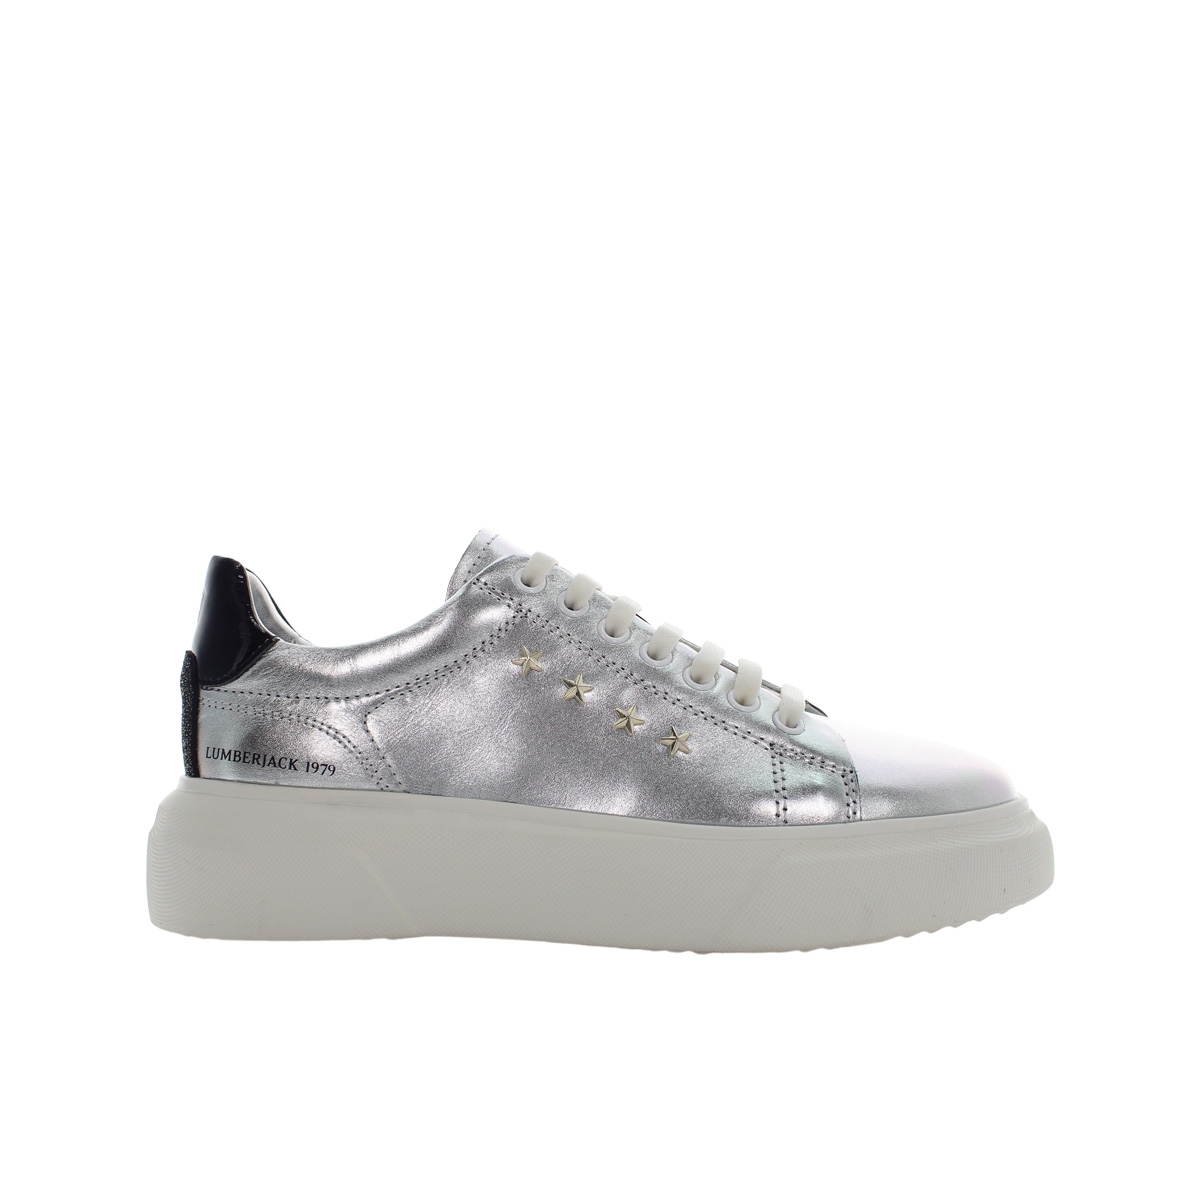 LEAH SNEAKERS DONNA